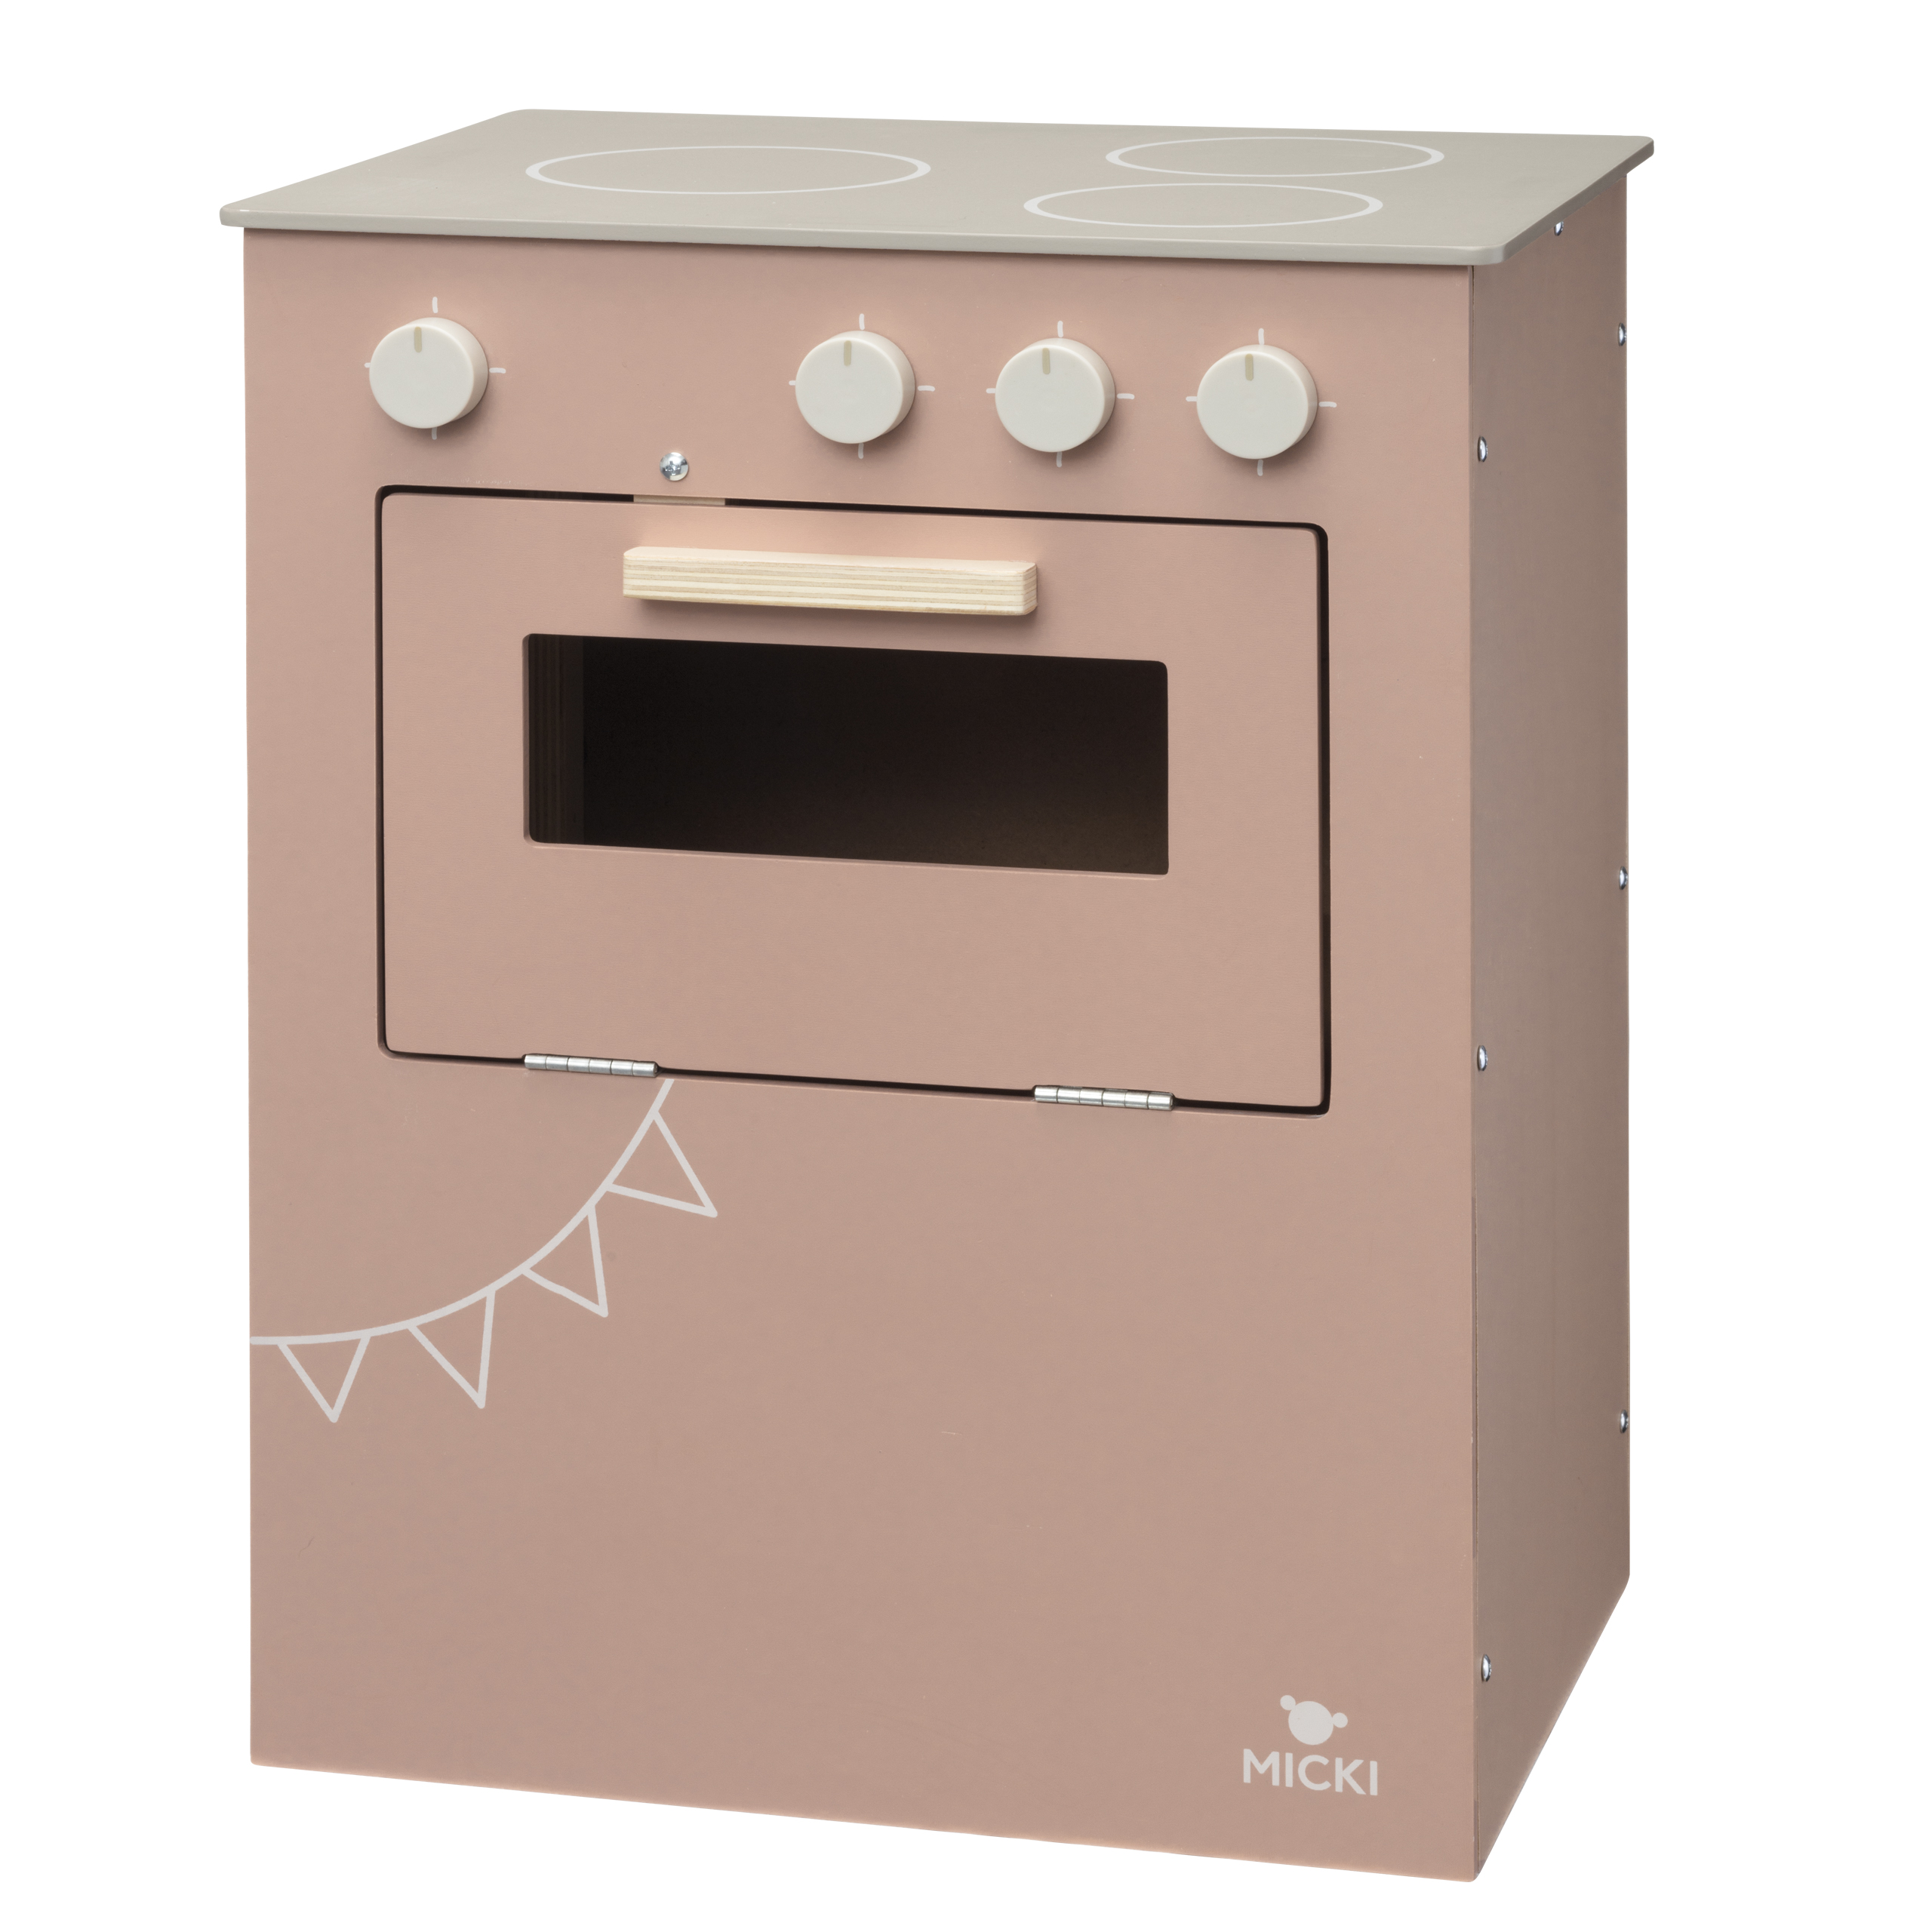 Wooden toys micki toy stove pink